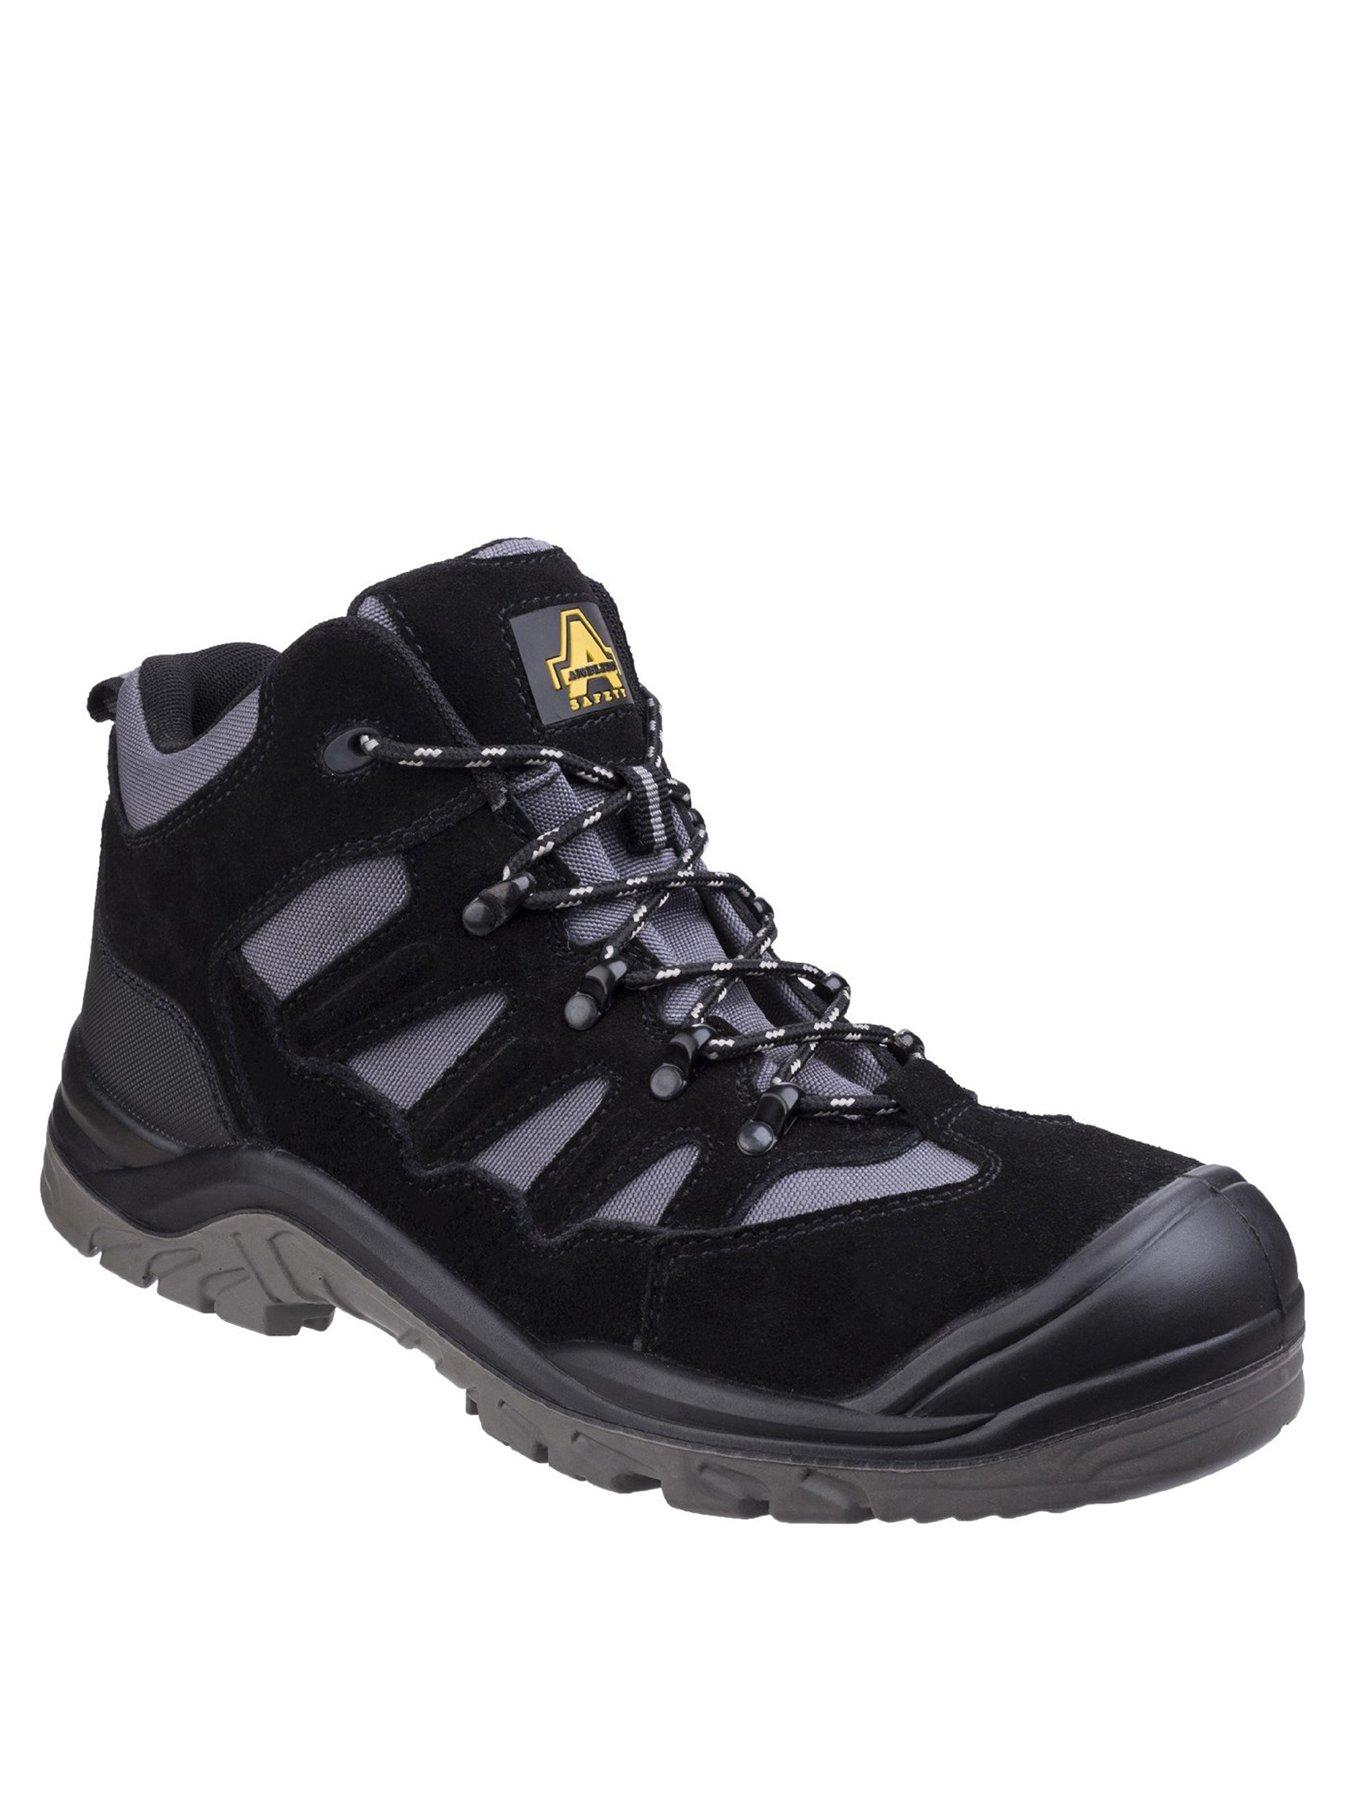 Shoes & boots Safety As251 Boots - Black